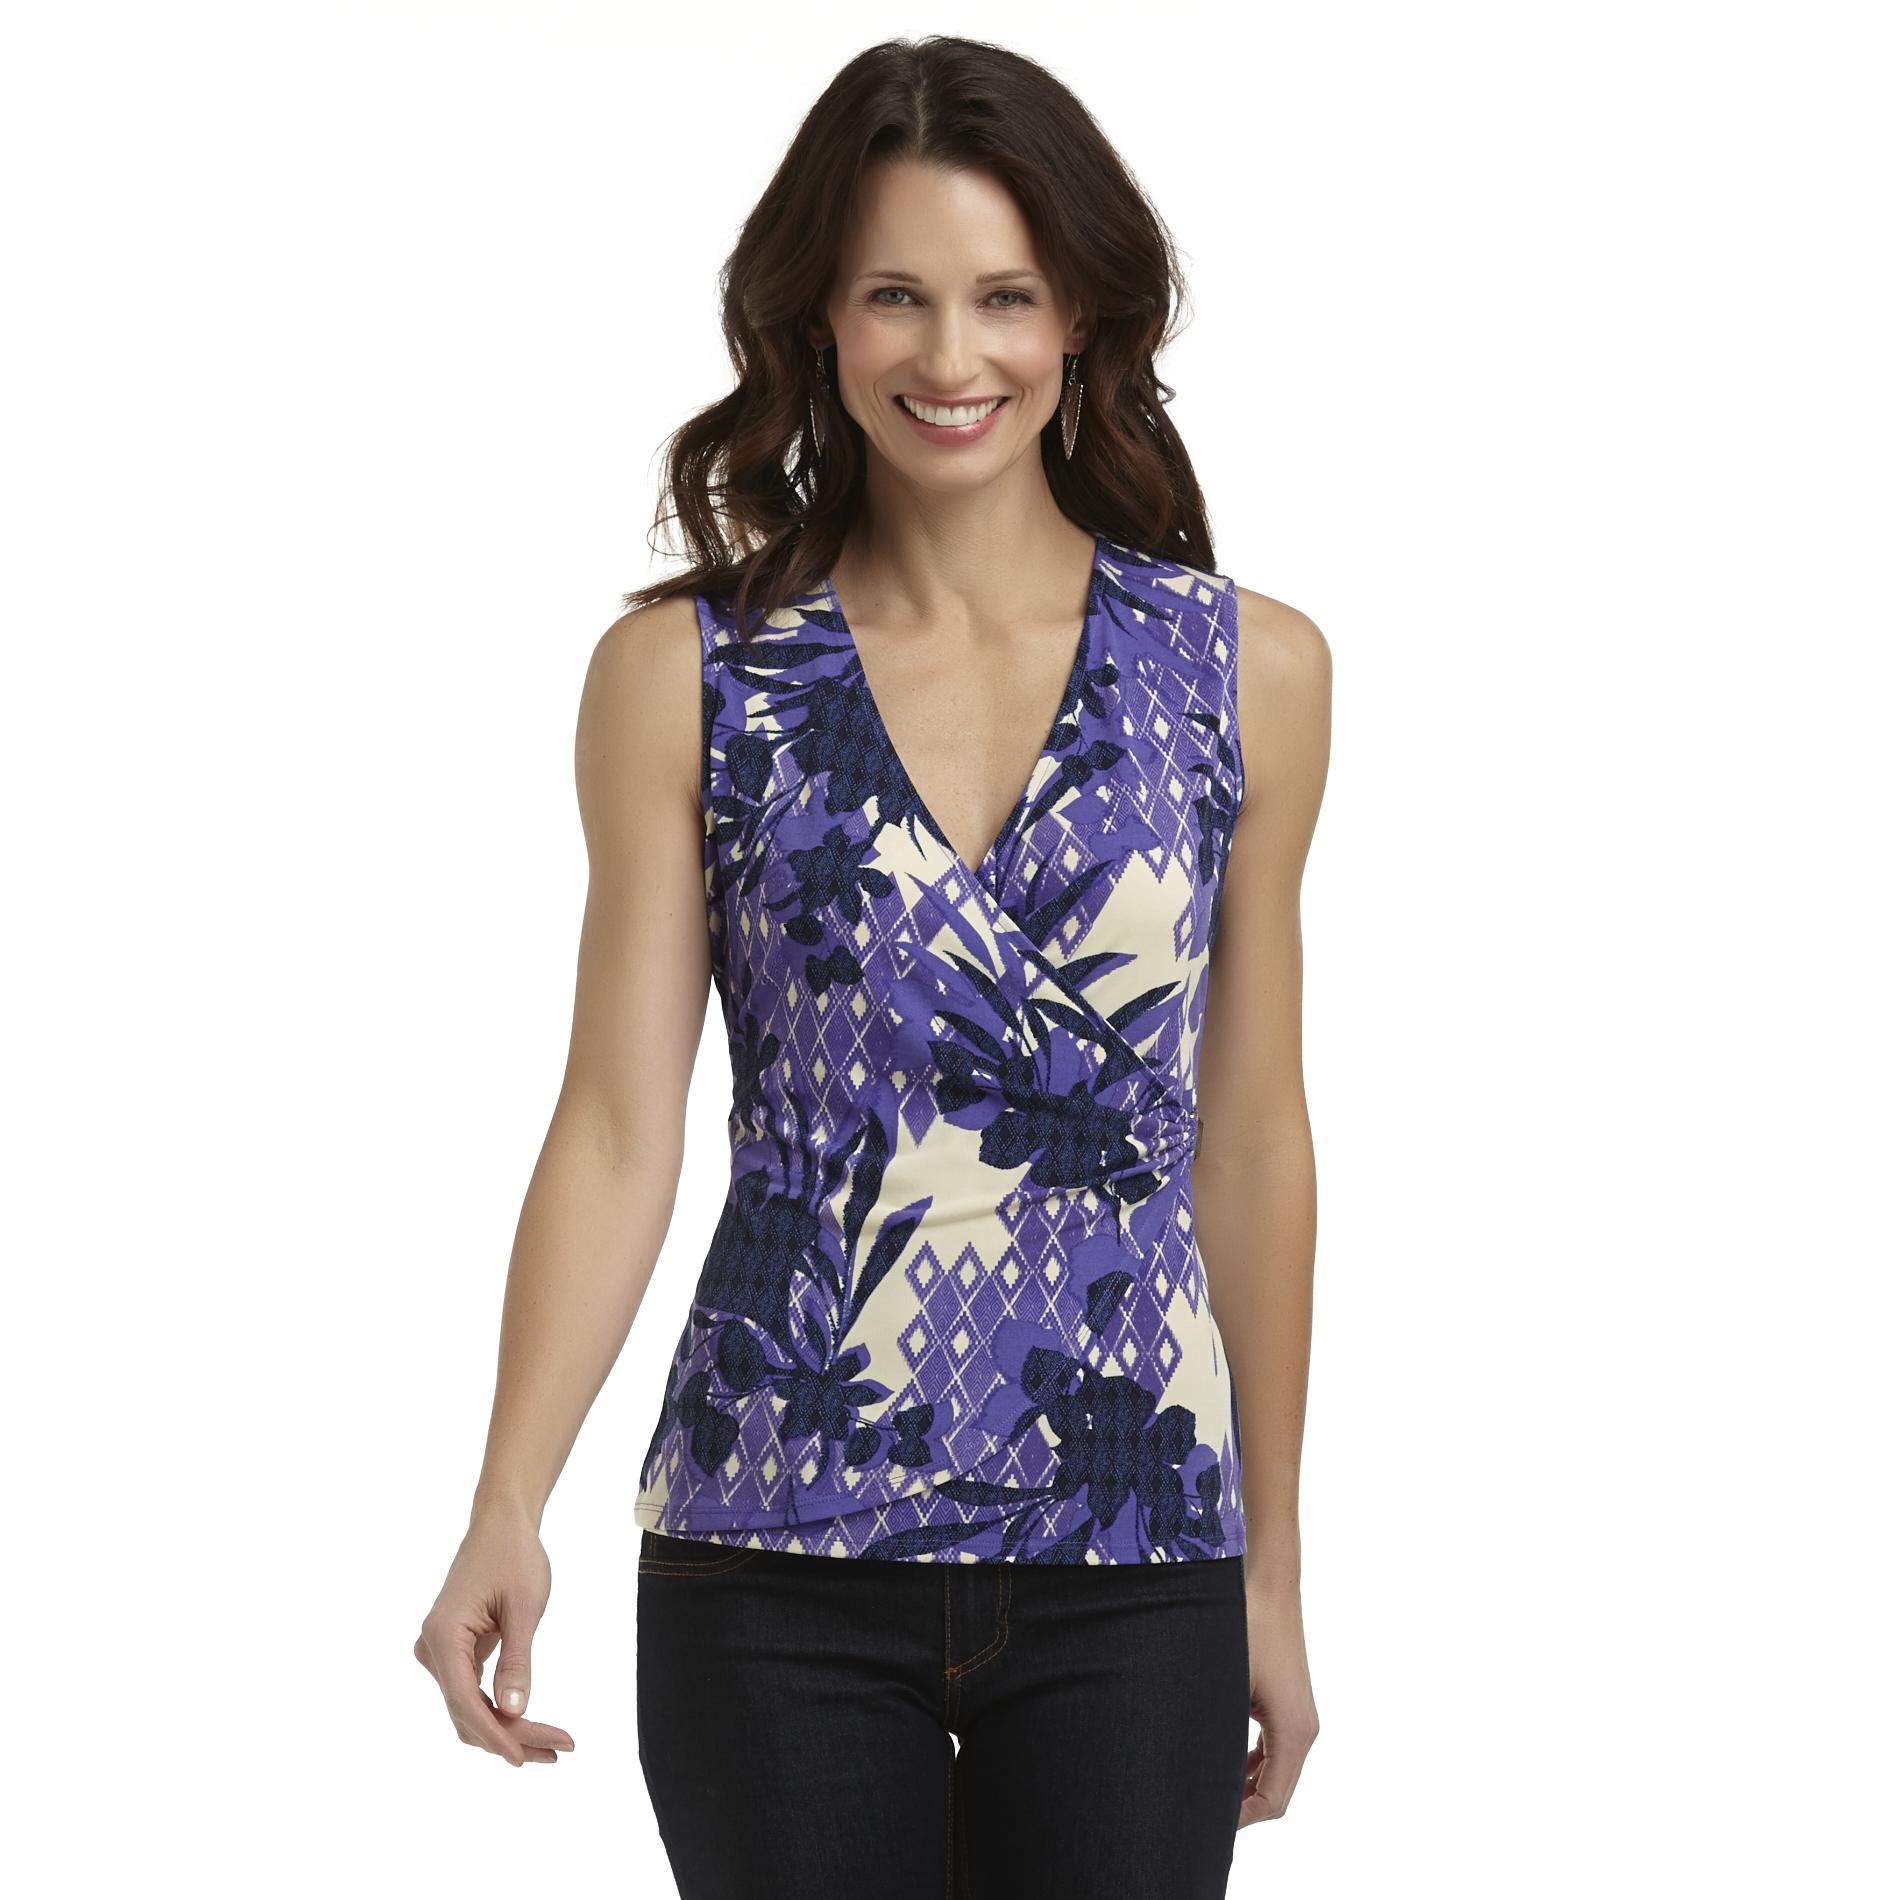 Jaclyn Smith Women's Crossover Top - Floral & Diamond Print